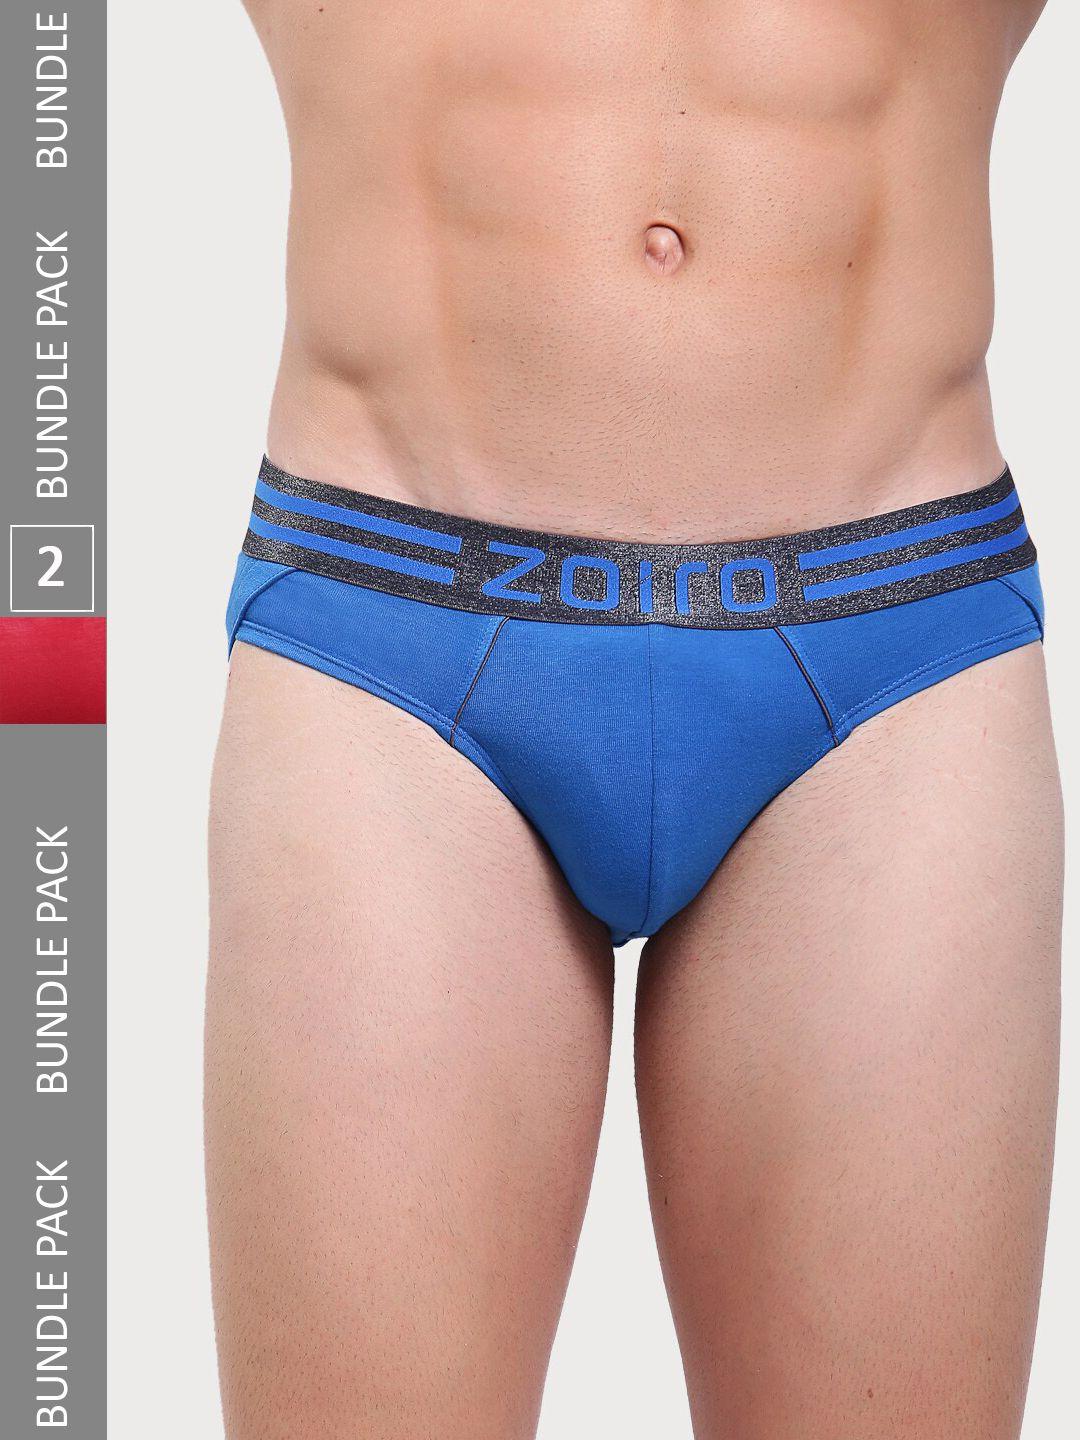 zoiro men pack of 2 mid-rise basic briefs sportsbrief-513chinesered+skydiver